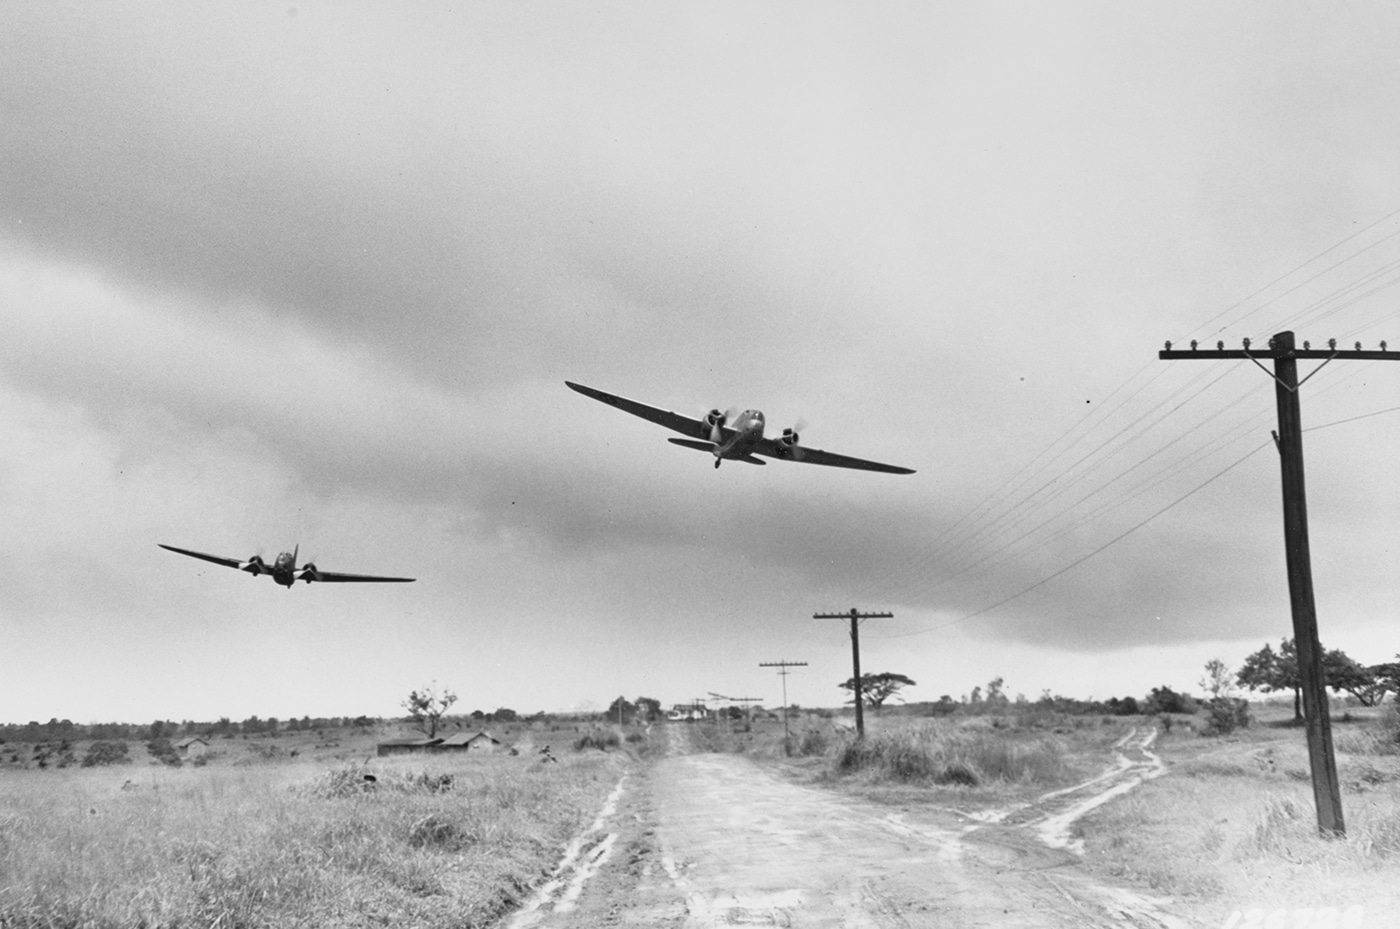 In this image, we see a pair of B-18 bombers making a simulated attack run on U.S. Army troops in the Philippines. This was part of war games to train the soldiers and pilots in tactics and combat. With the B-18s deployed outside the continental United States, they expected to see action when the inevitable war with Japan came about.